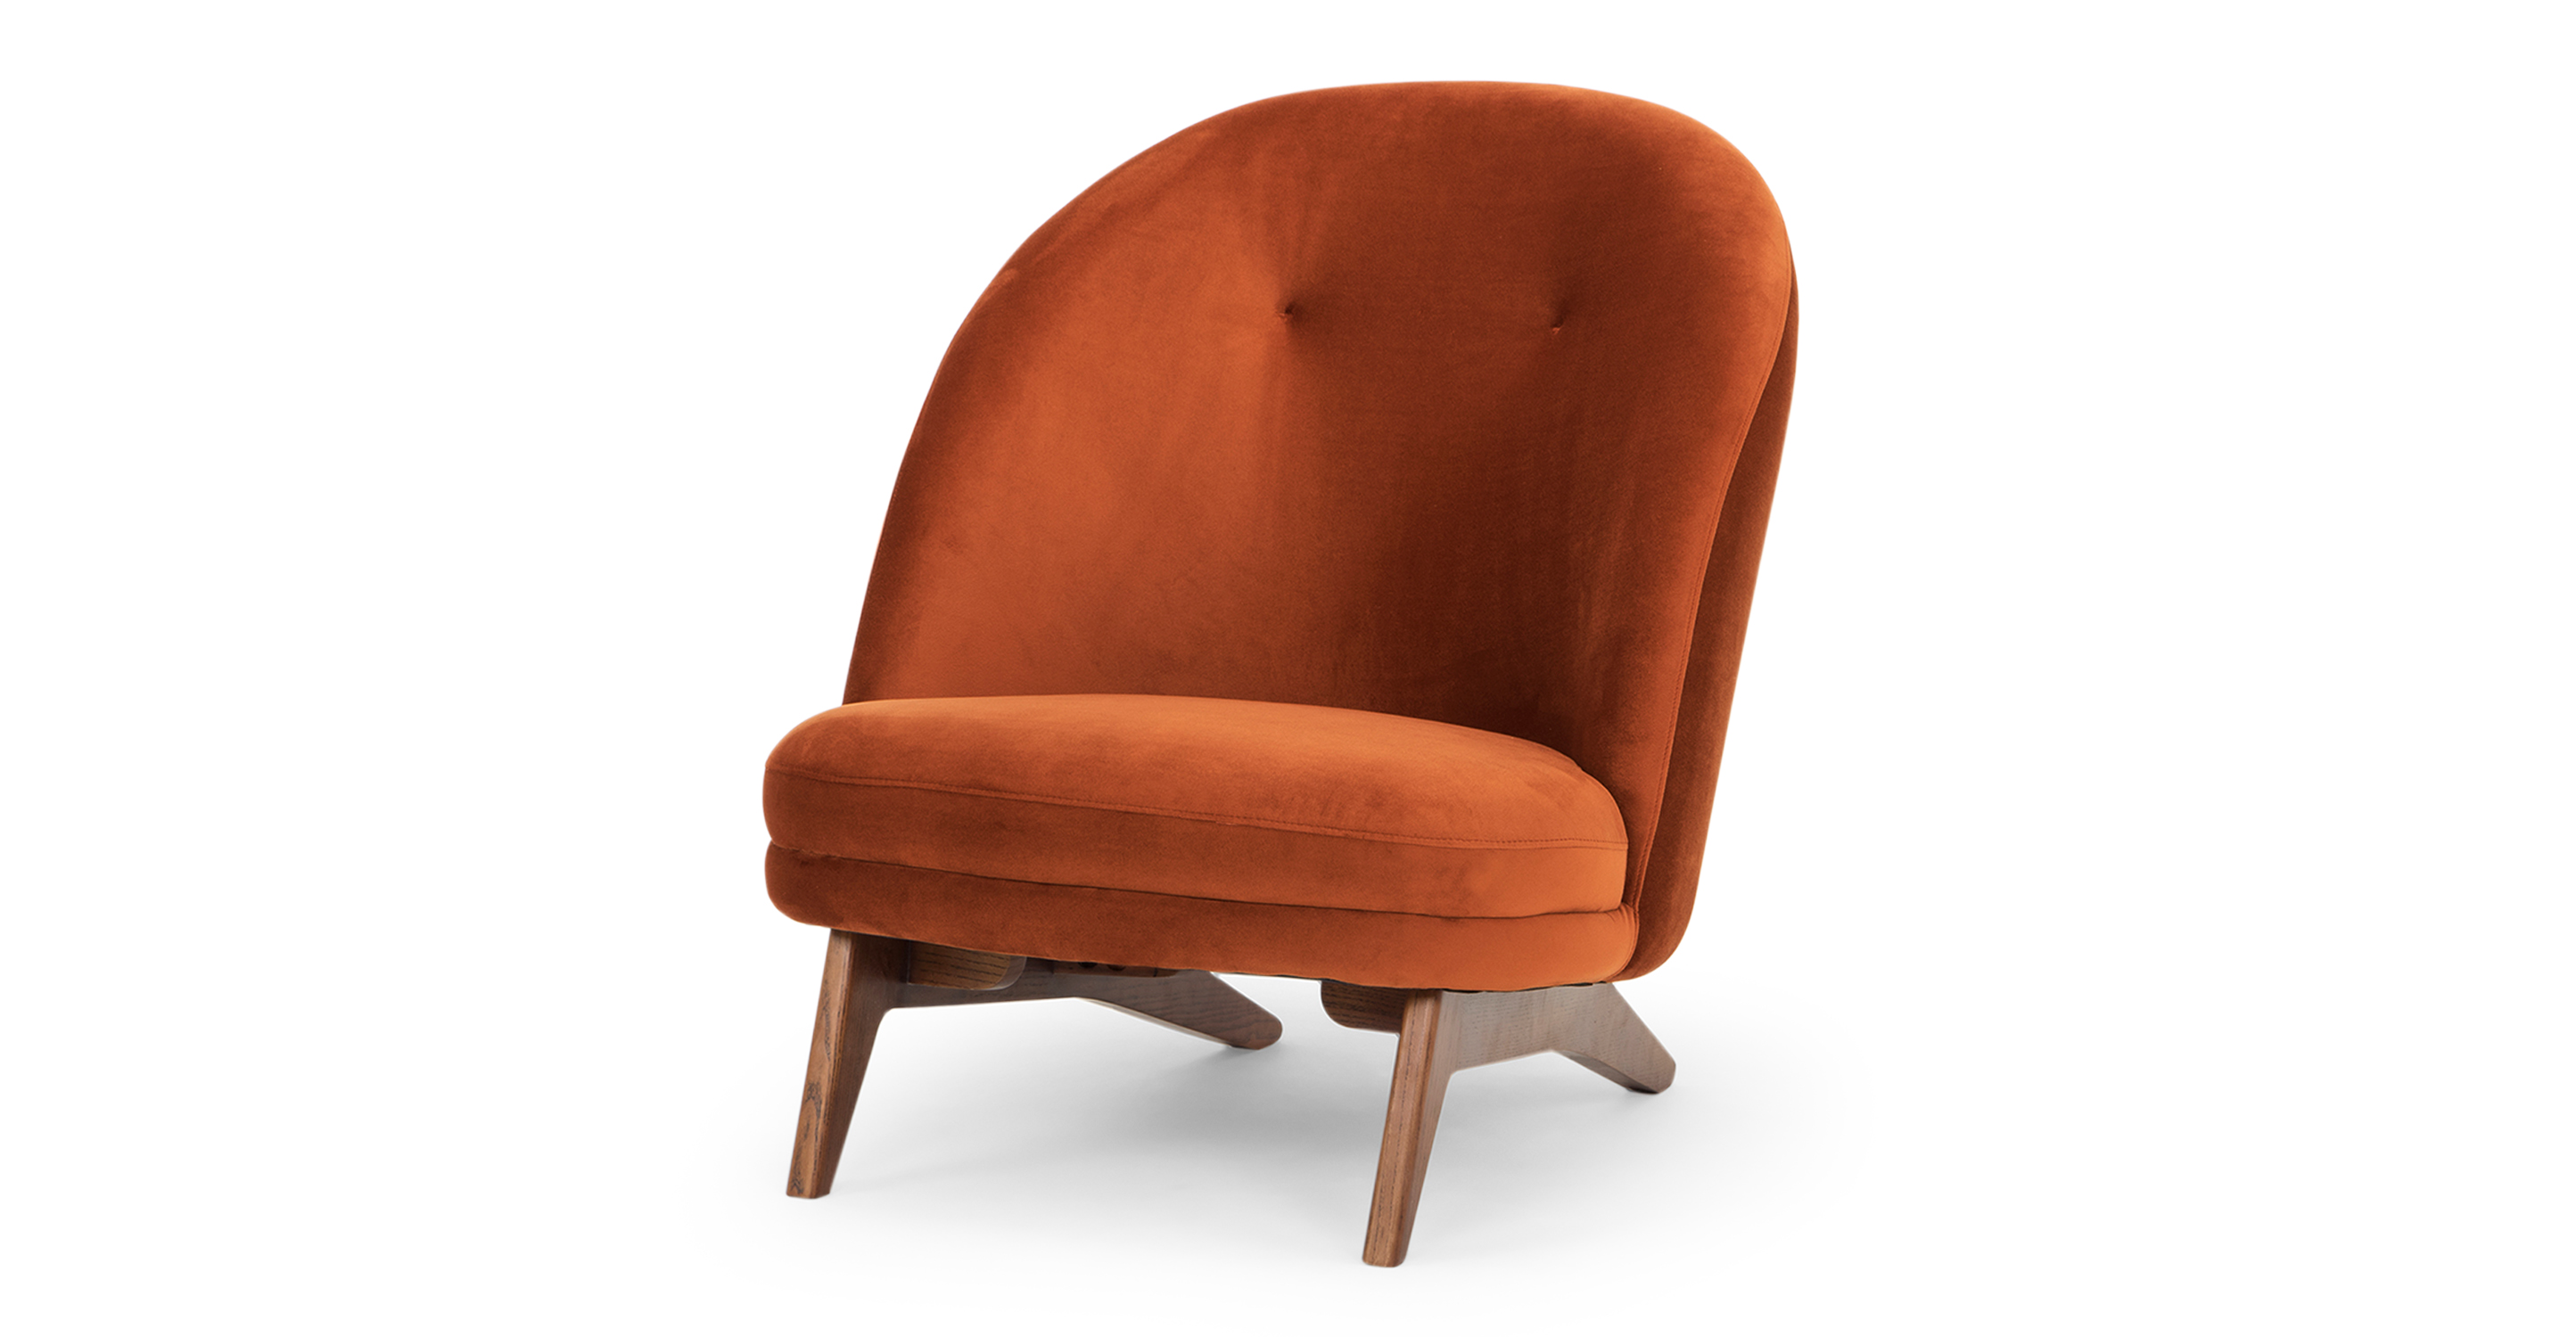 Leon chair with rounded back with two tufted and flat piped seat. Walnut angled frame.